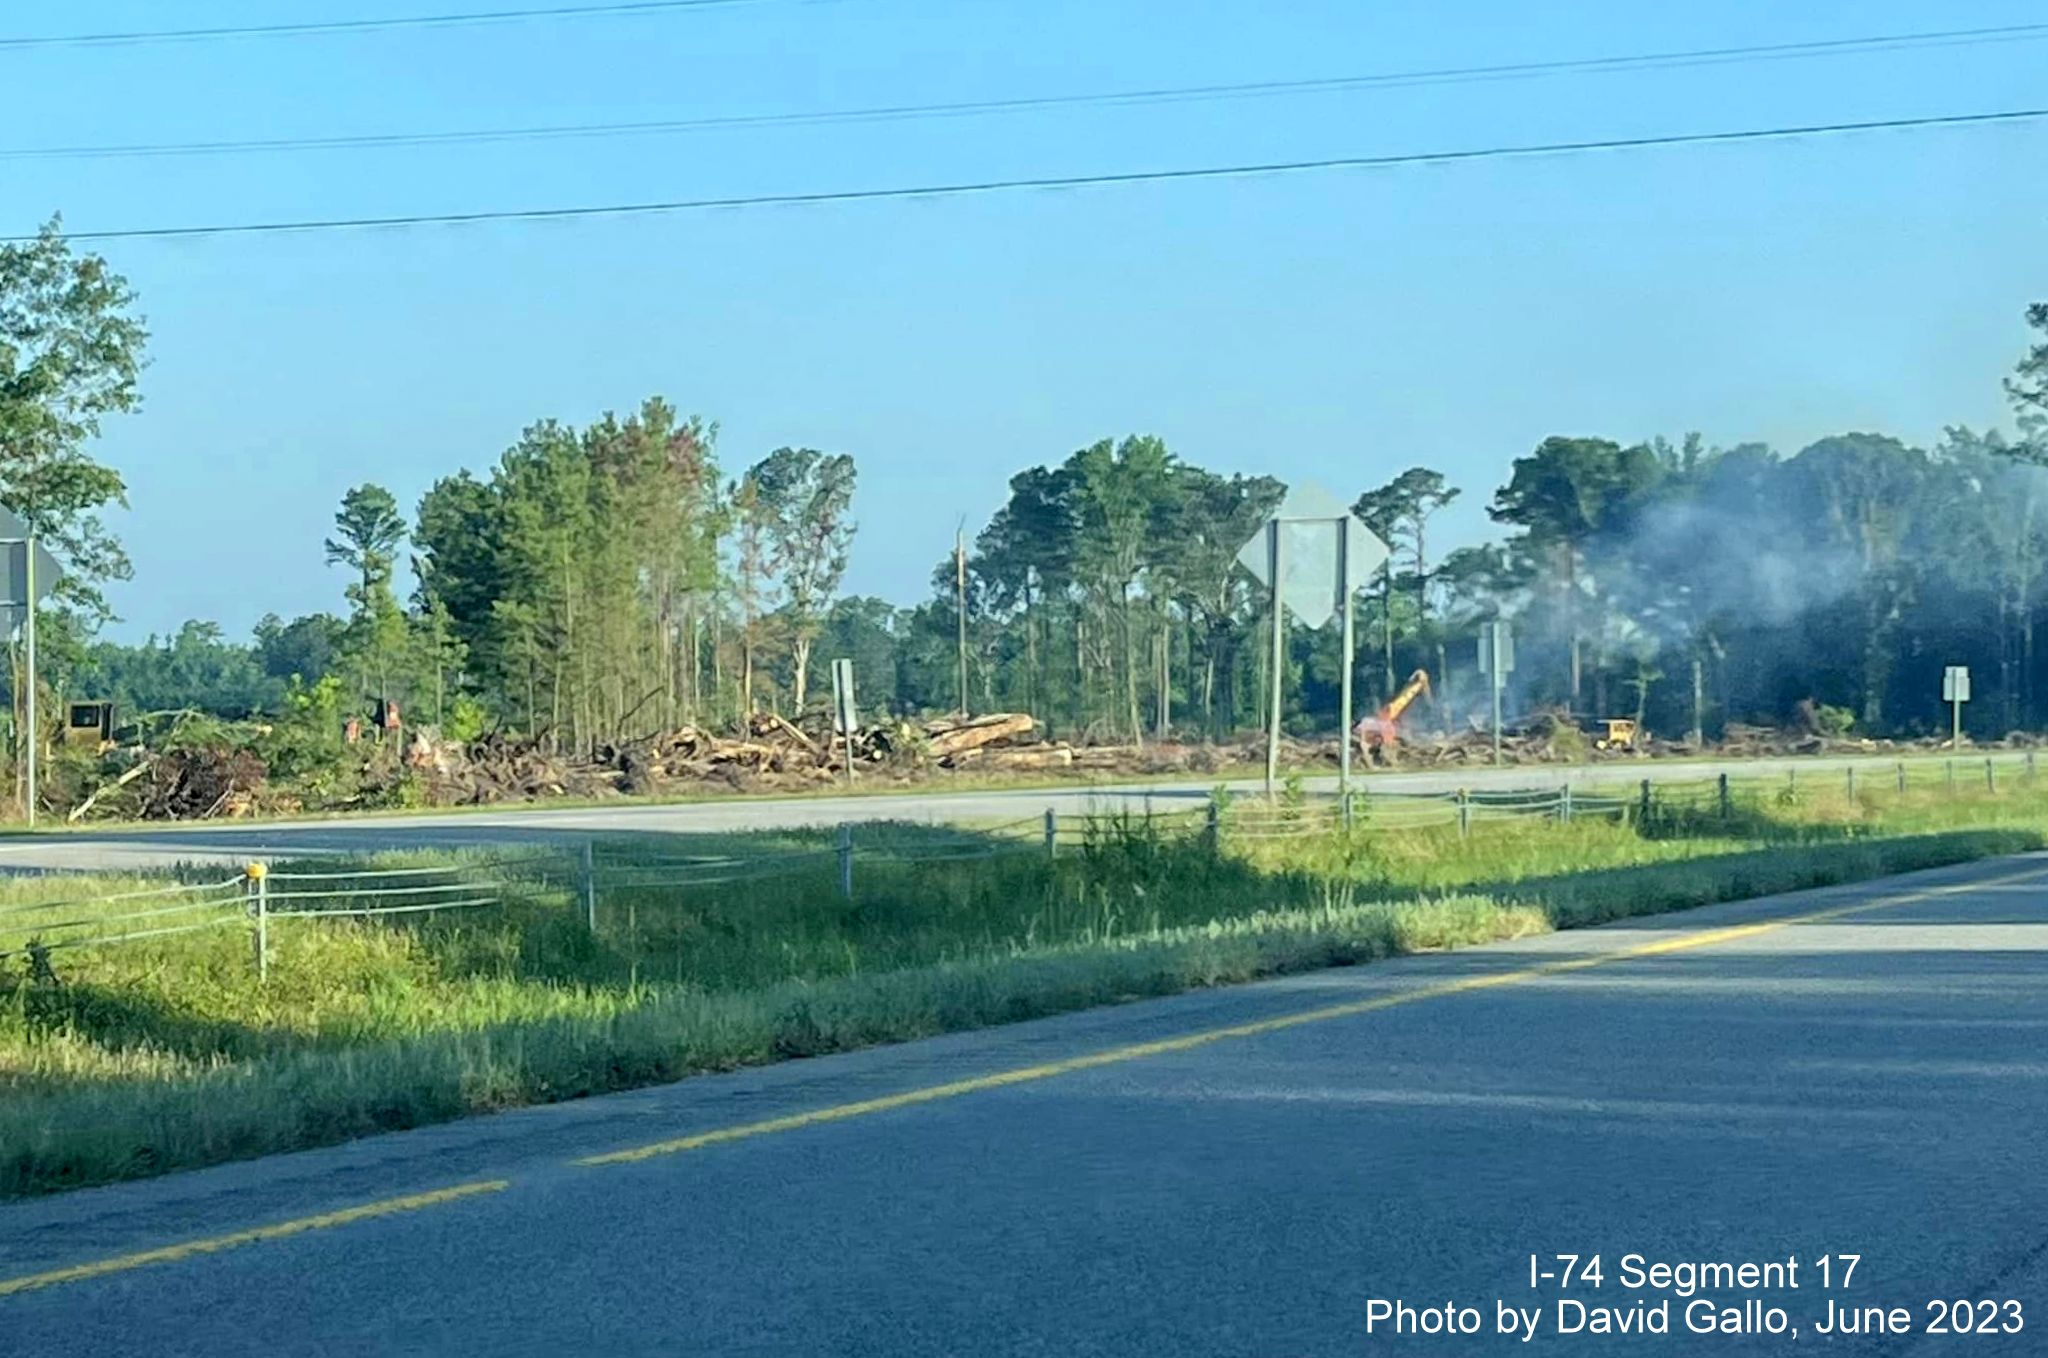 Image of brush being cleared and burned in area surrounding future interchange with US 74 
       (Future I-74) and NC 72/130, by David Gallo, June 2023